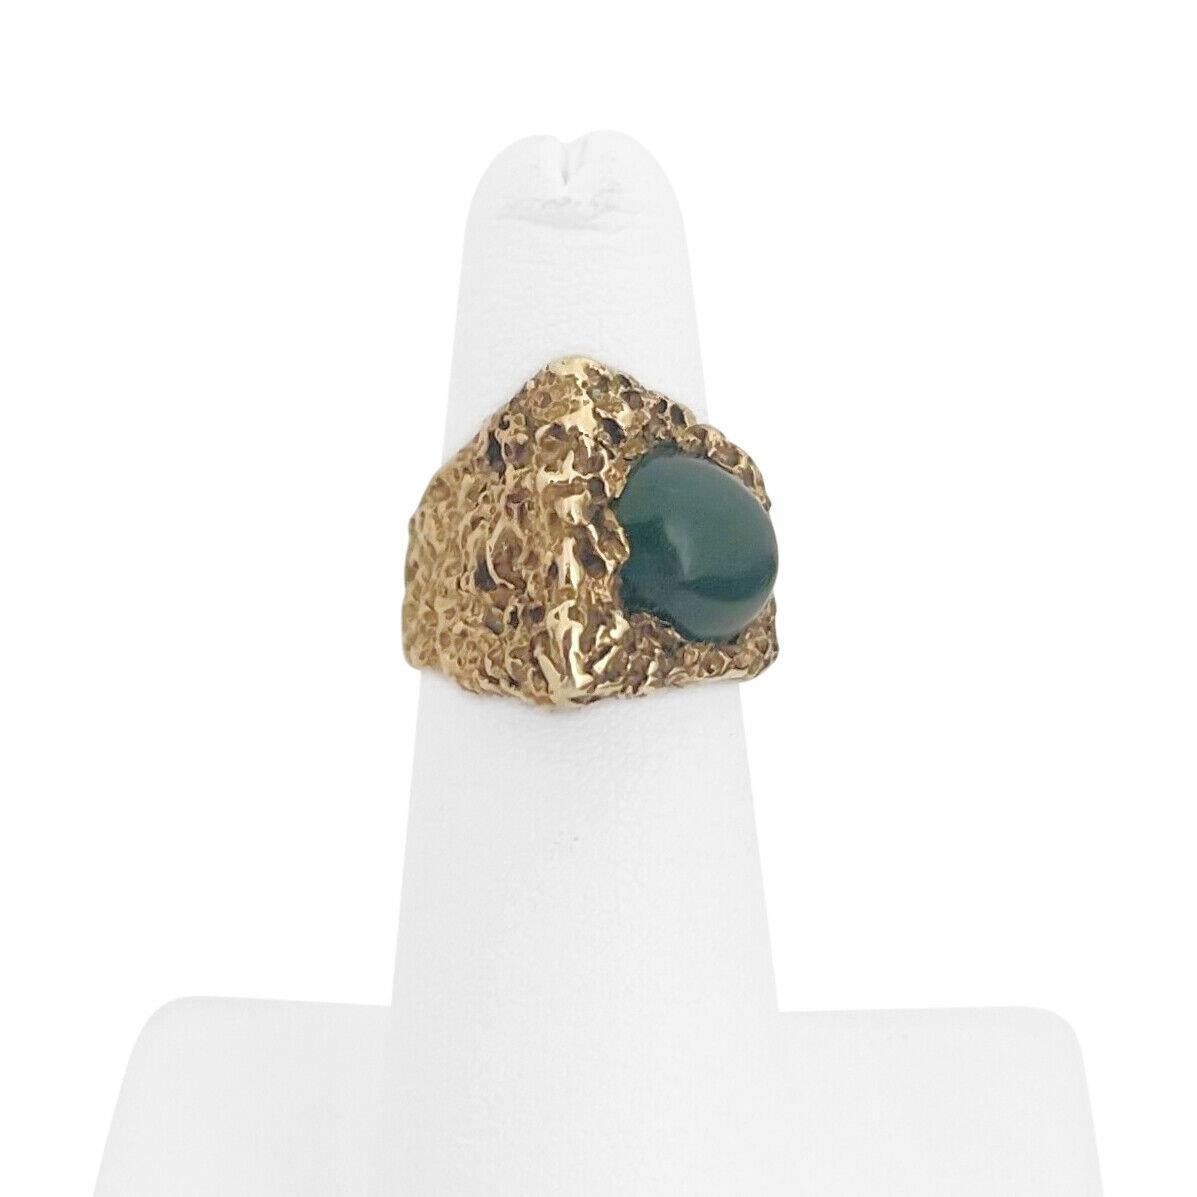 14k Yellow Gold and Cabochon Jade Abstract Geometric Ring Size 5

Condition:  Excellent Condition, Professionally Cleaned and Polished
Metal:  14k Gold (Marked, and Professionally Tested)
Weight:  13.2g
Gemstone:  Cabochon Dark Green Jade
Width: 